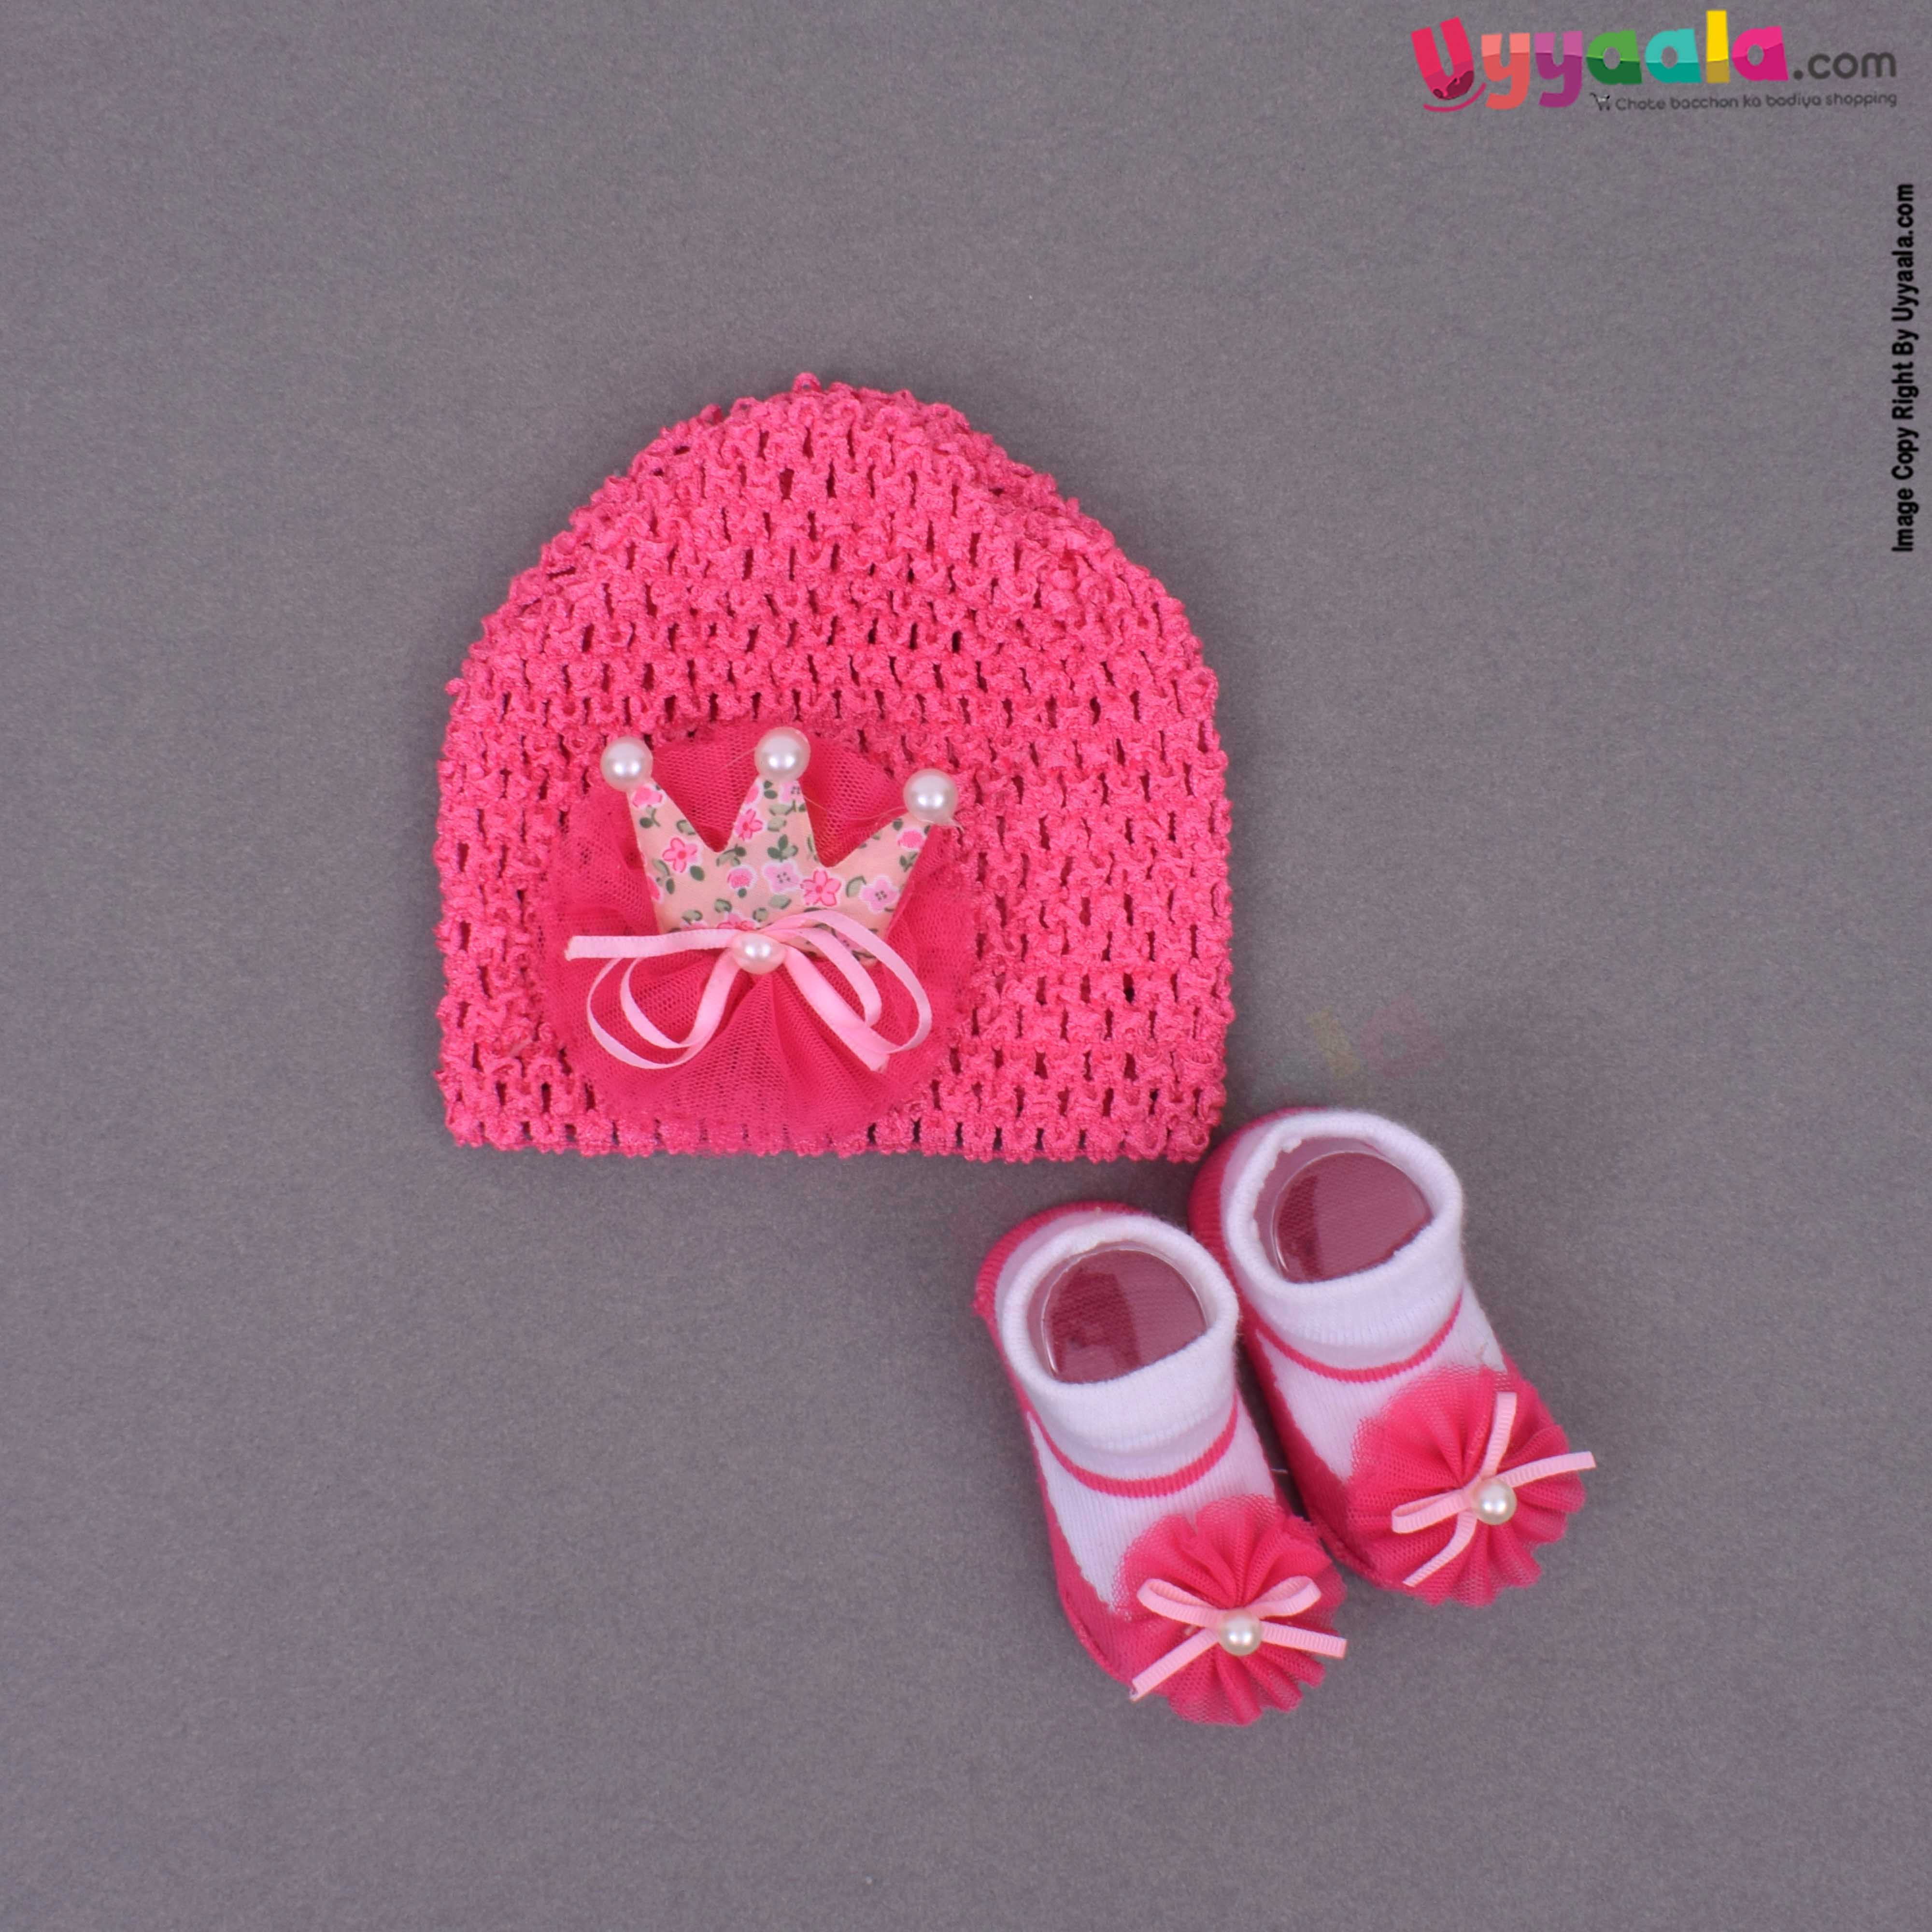 SUN SHINE BABY Accessory set for kids with cap and socks